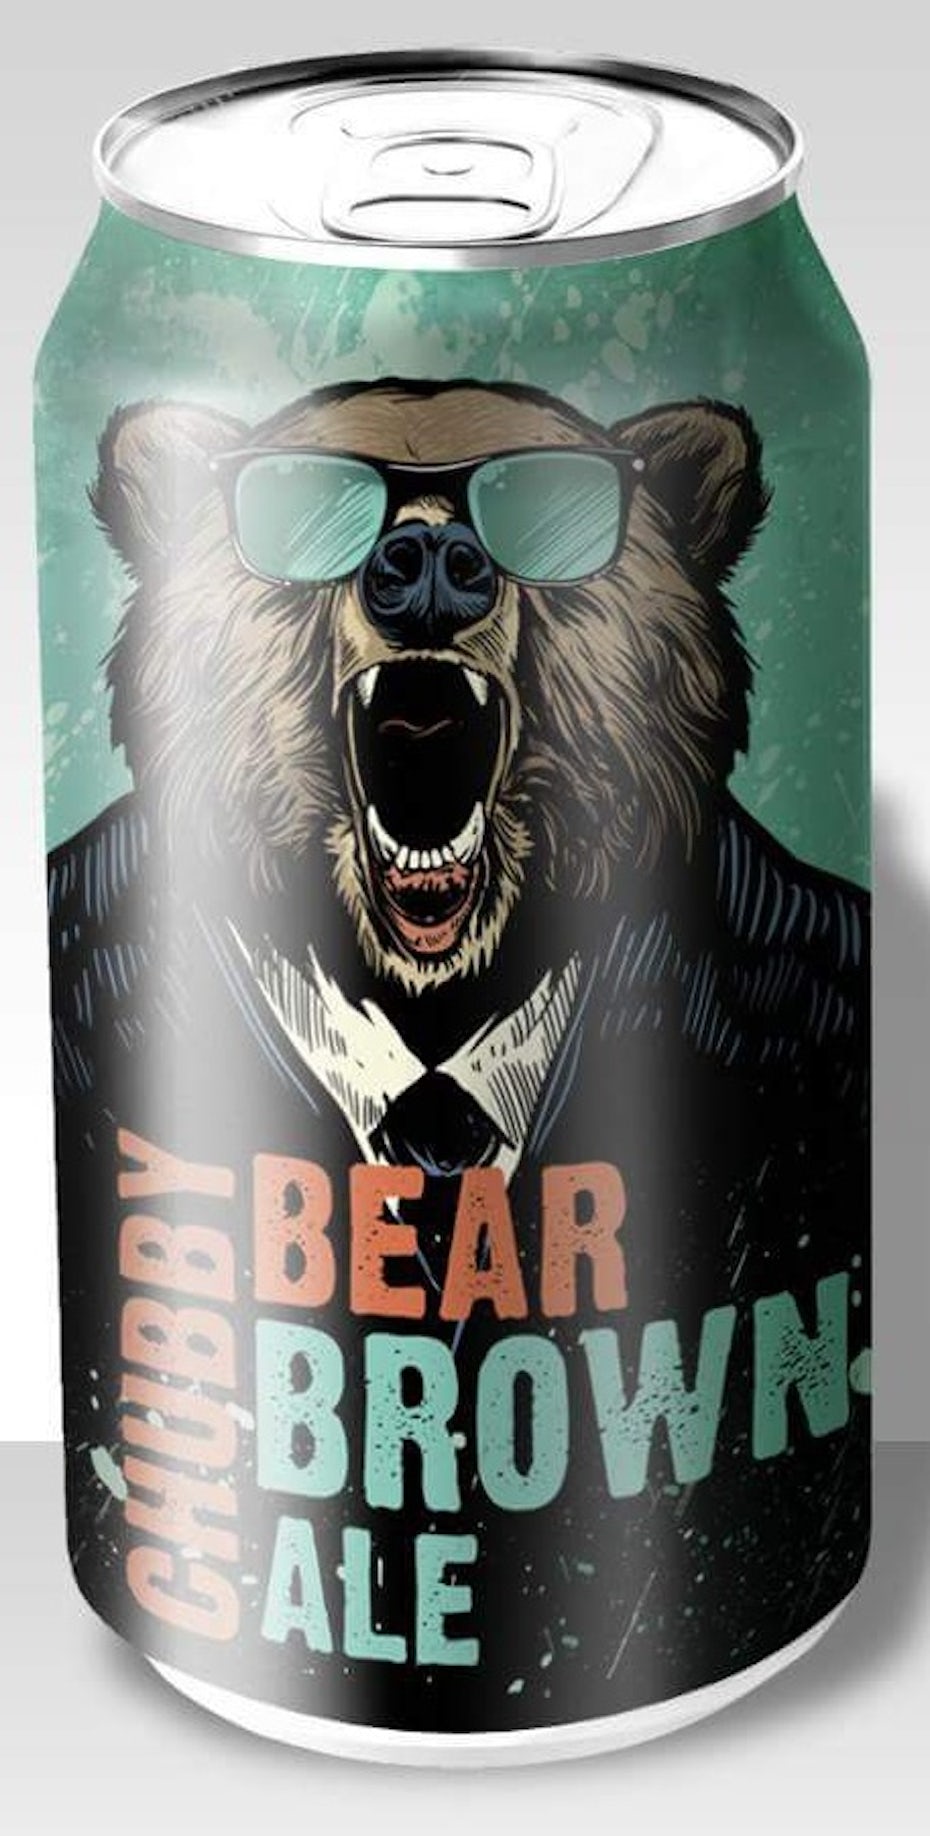 story-driven packaging design trend: beer can showing a bear with sunglasses